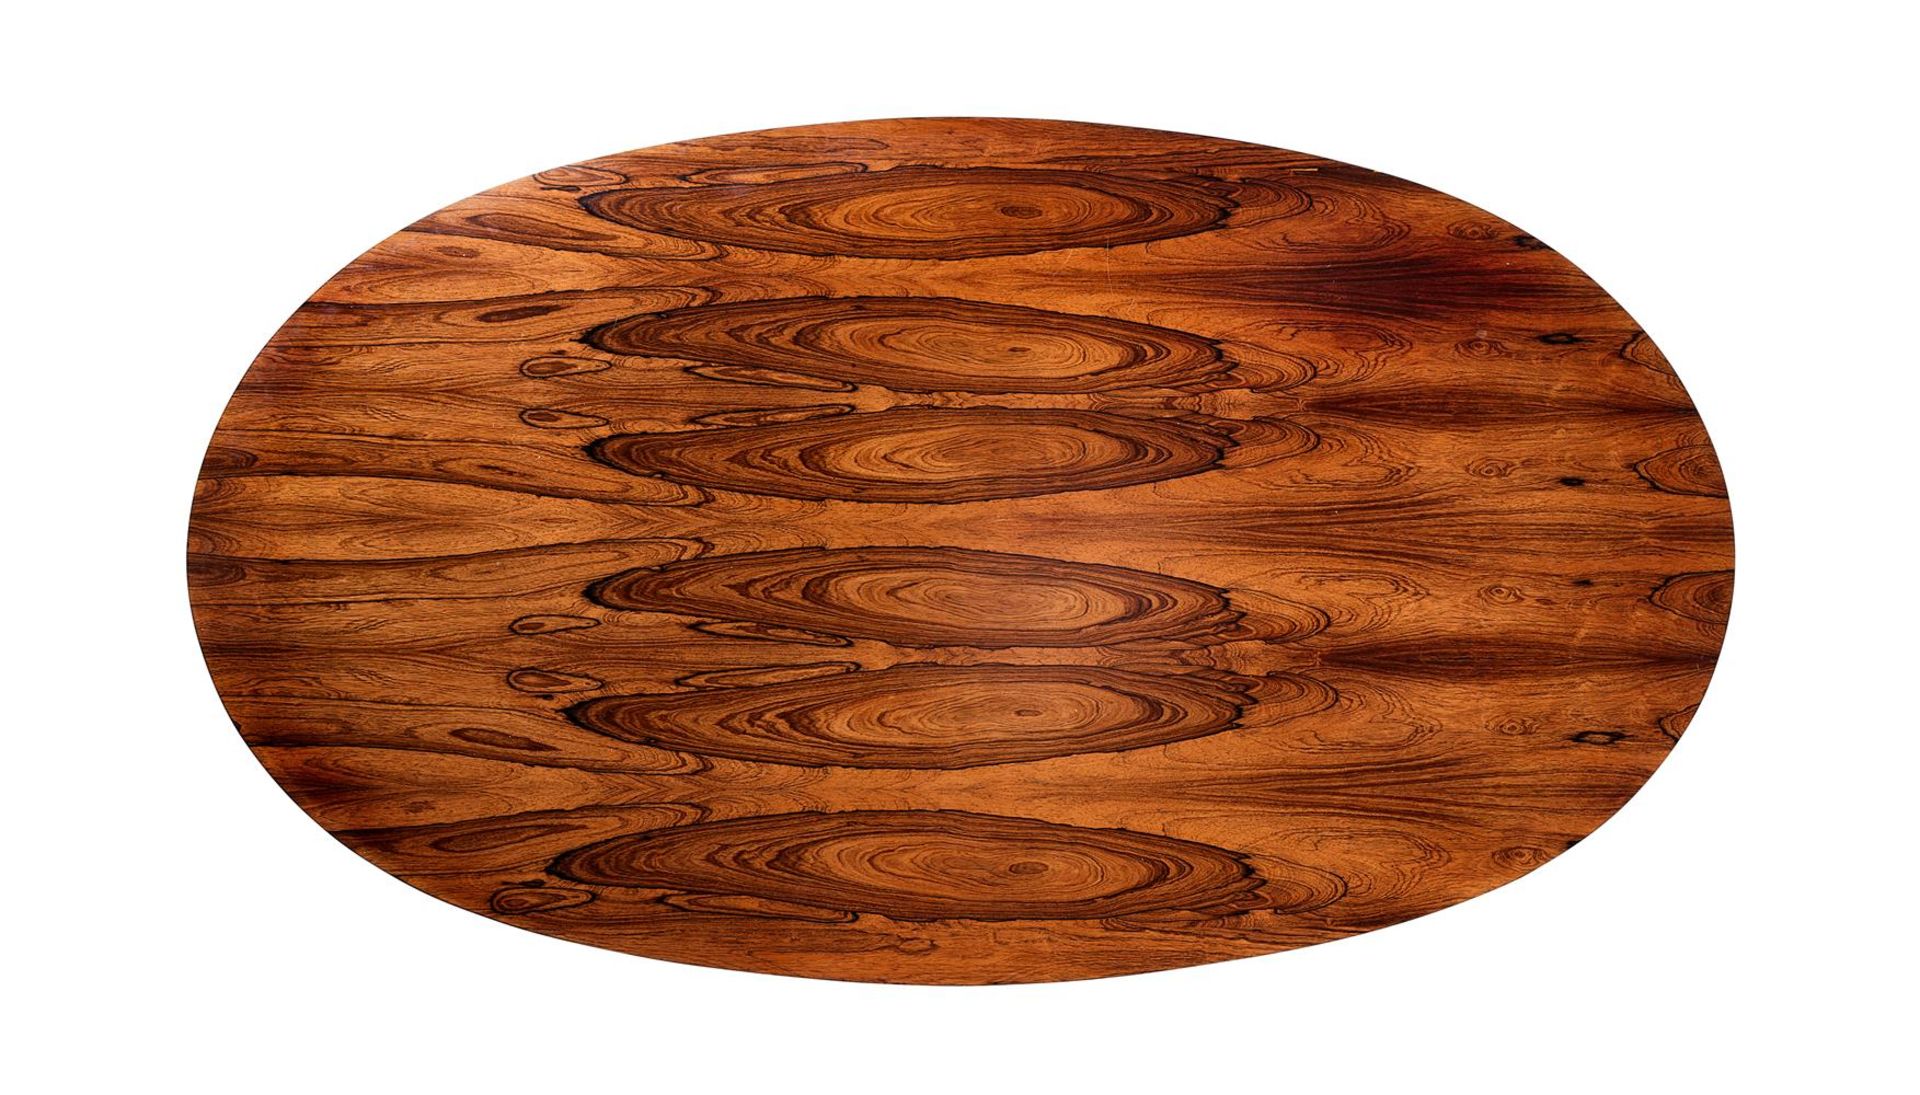 AN ITALIAN BRASS MOUNTED MAHOGANY DINING TABLE ATTRIBUTED TO PAOLO BUFFA (B.1903-1970), CIRCA 1950 - Image 2 of 4